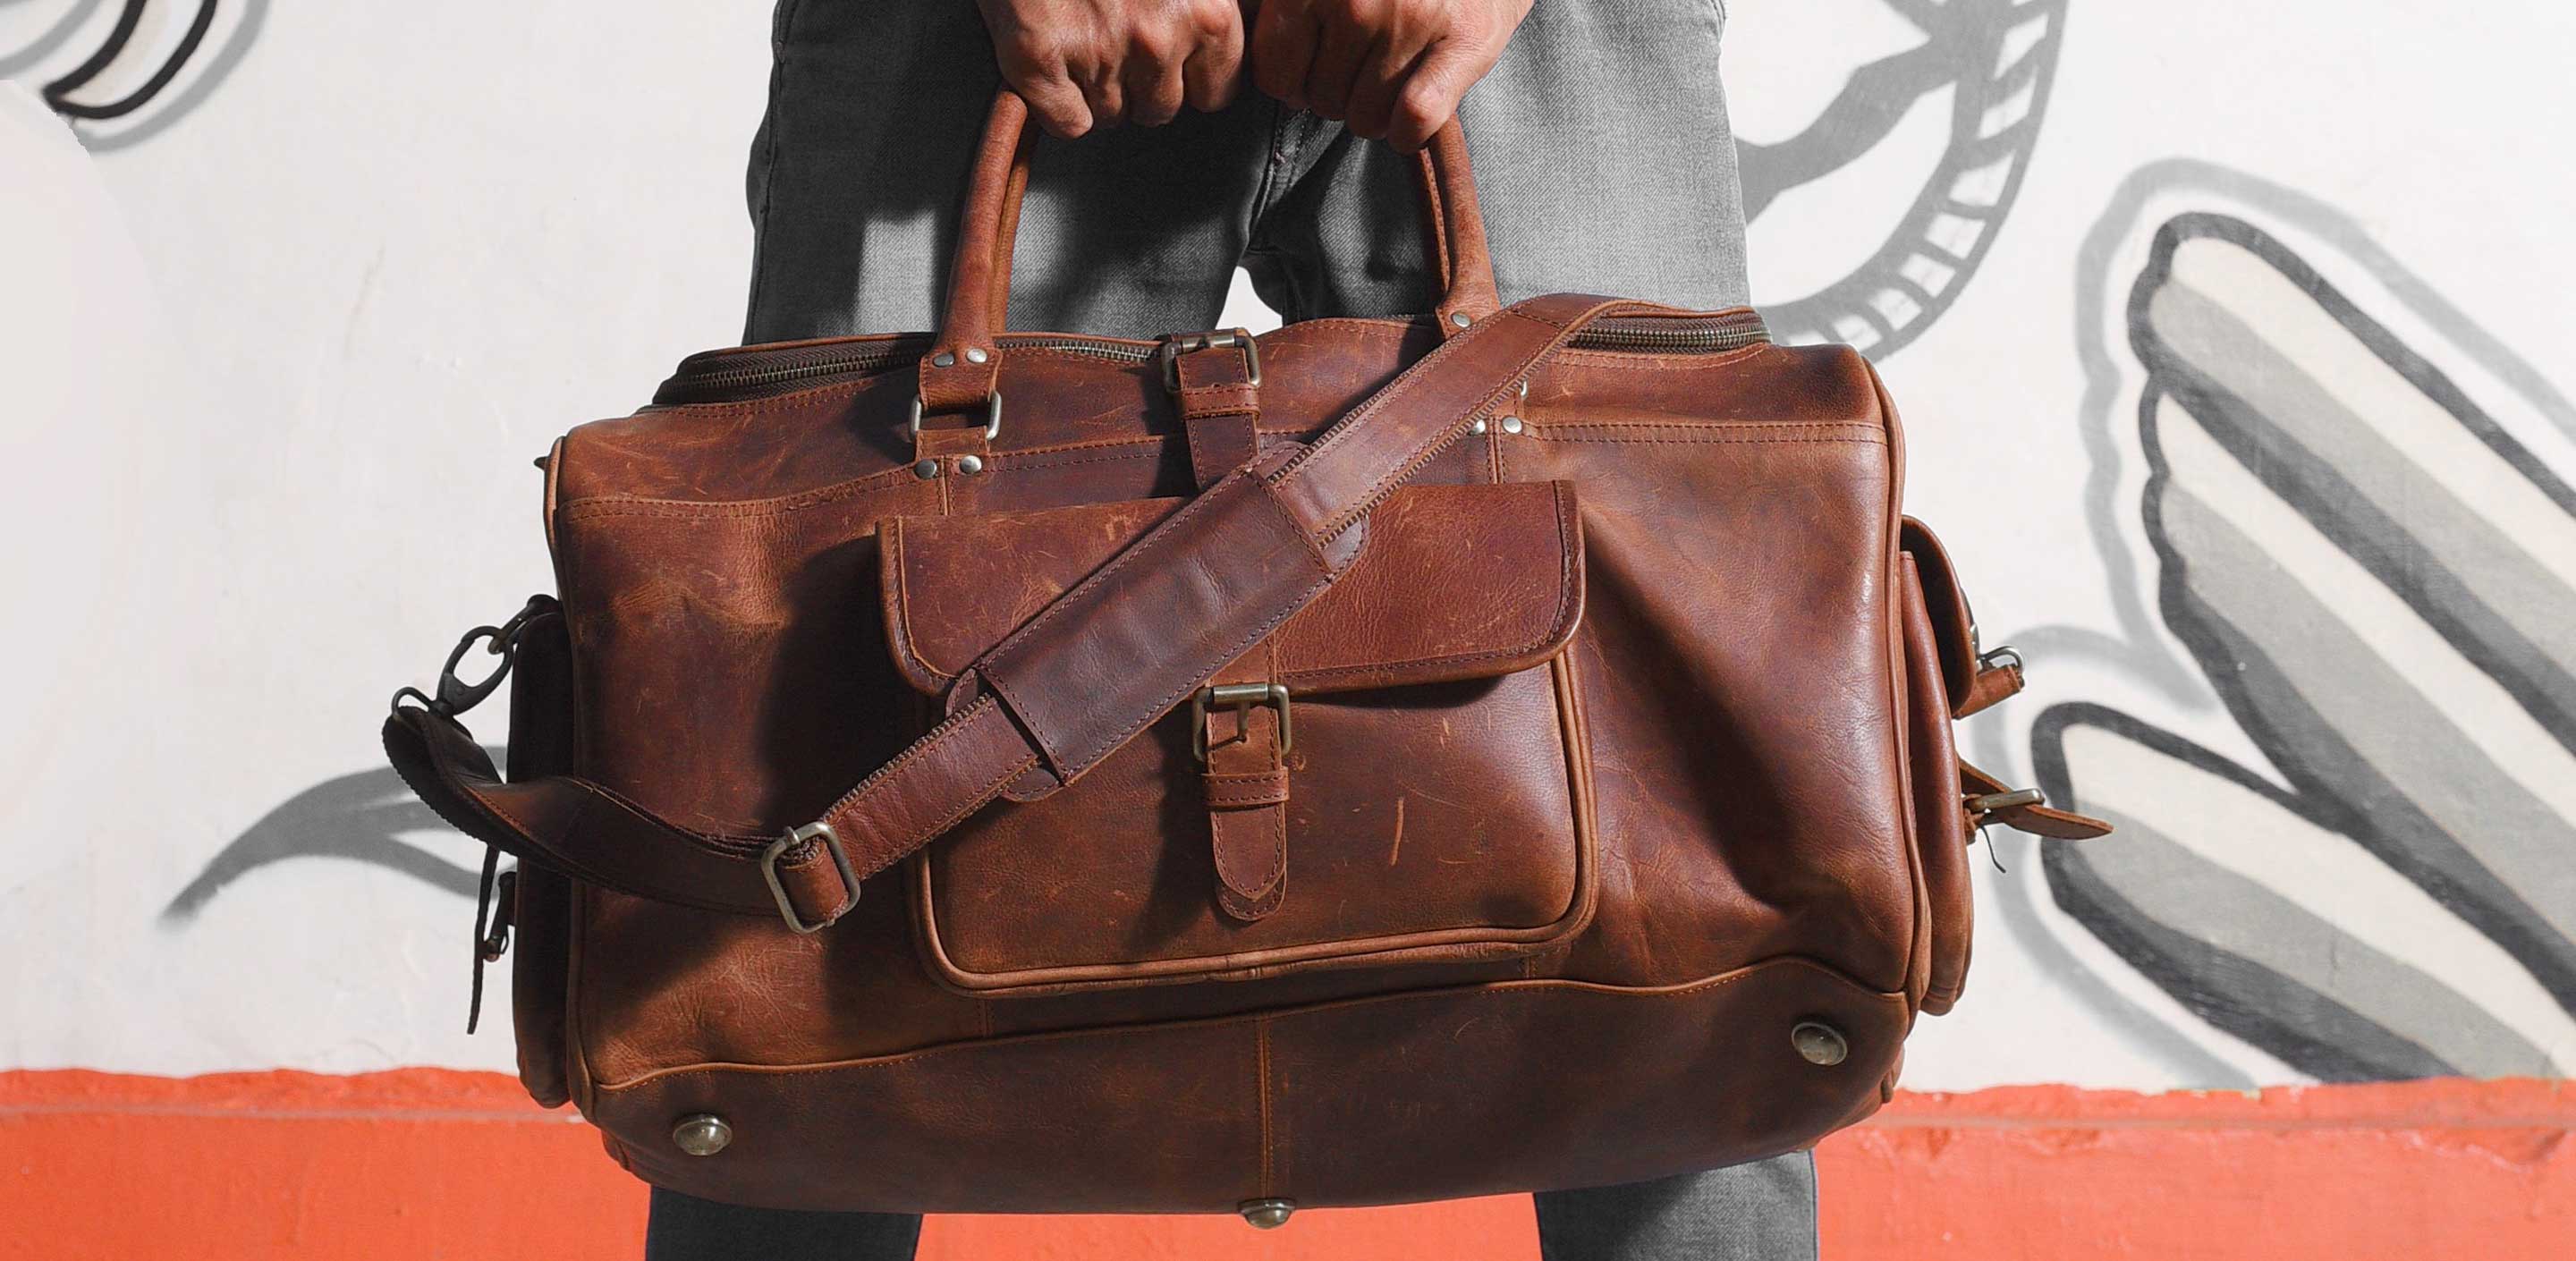 Are Leather Duffel Bags allowed on Planes? | Leather Jacket Shop